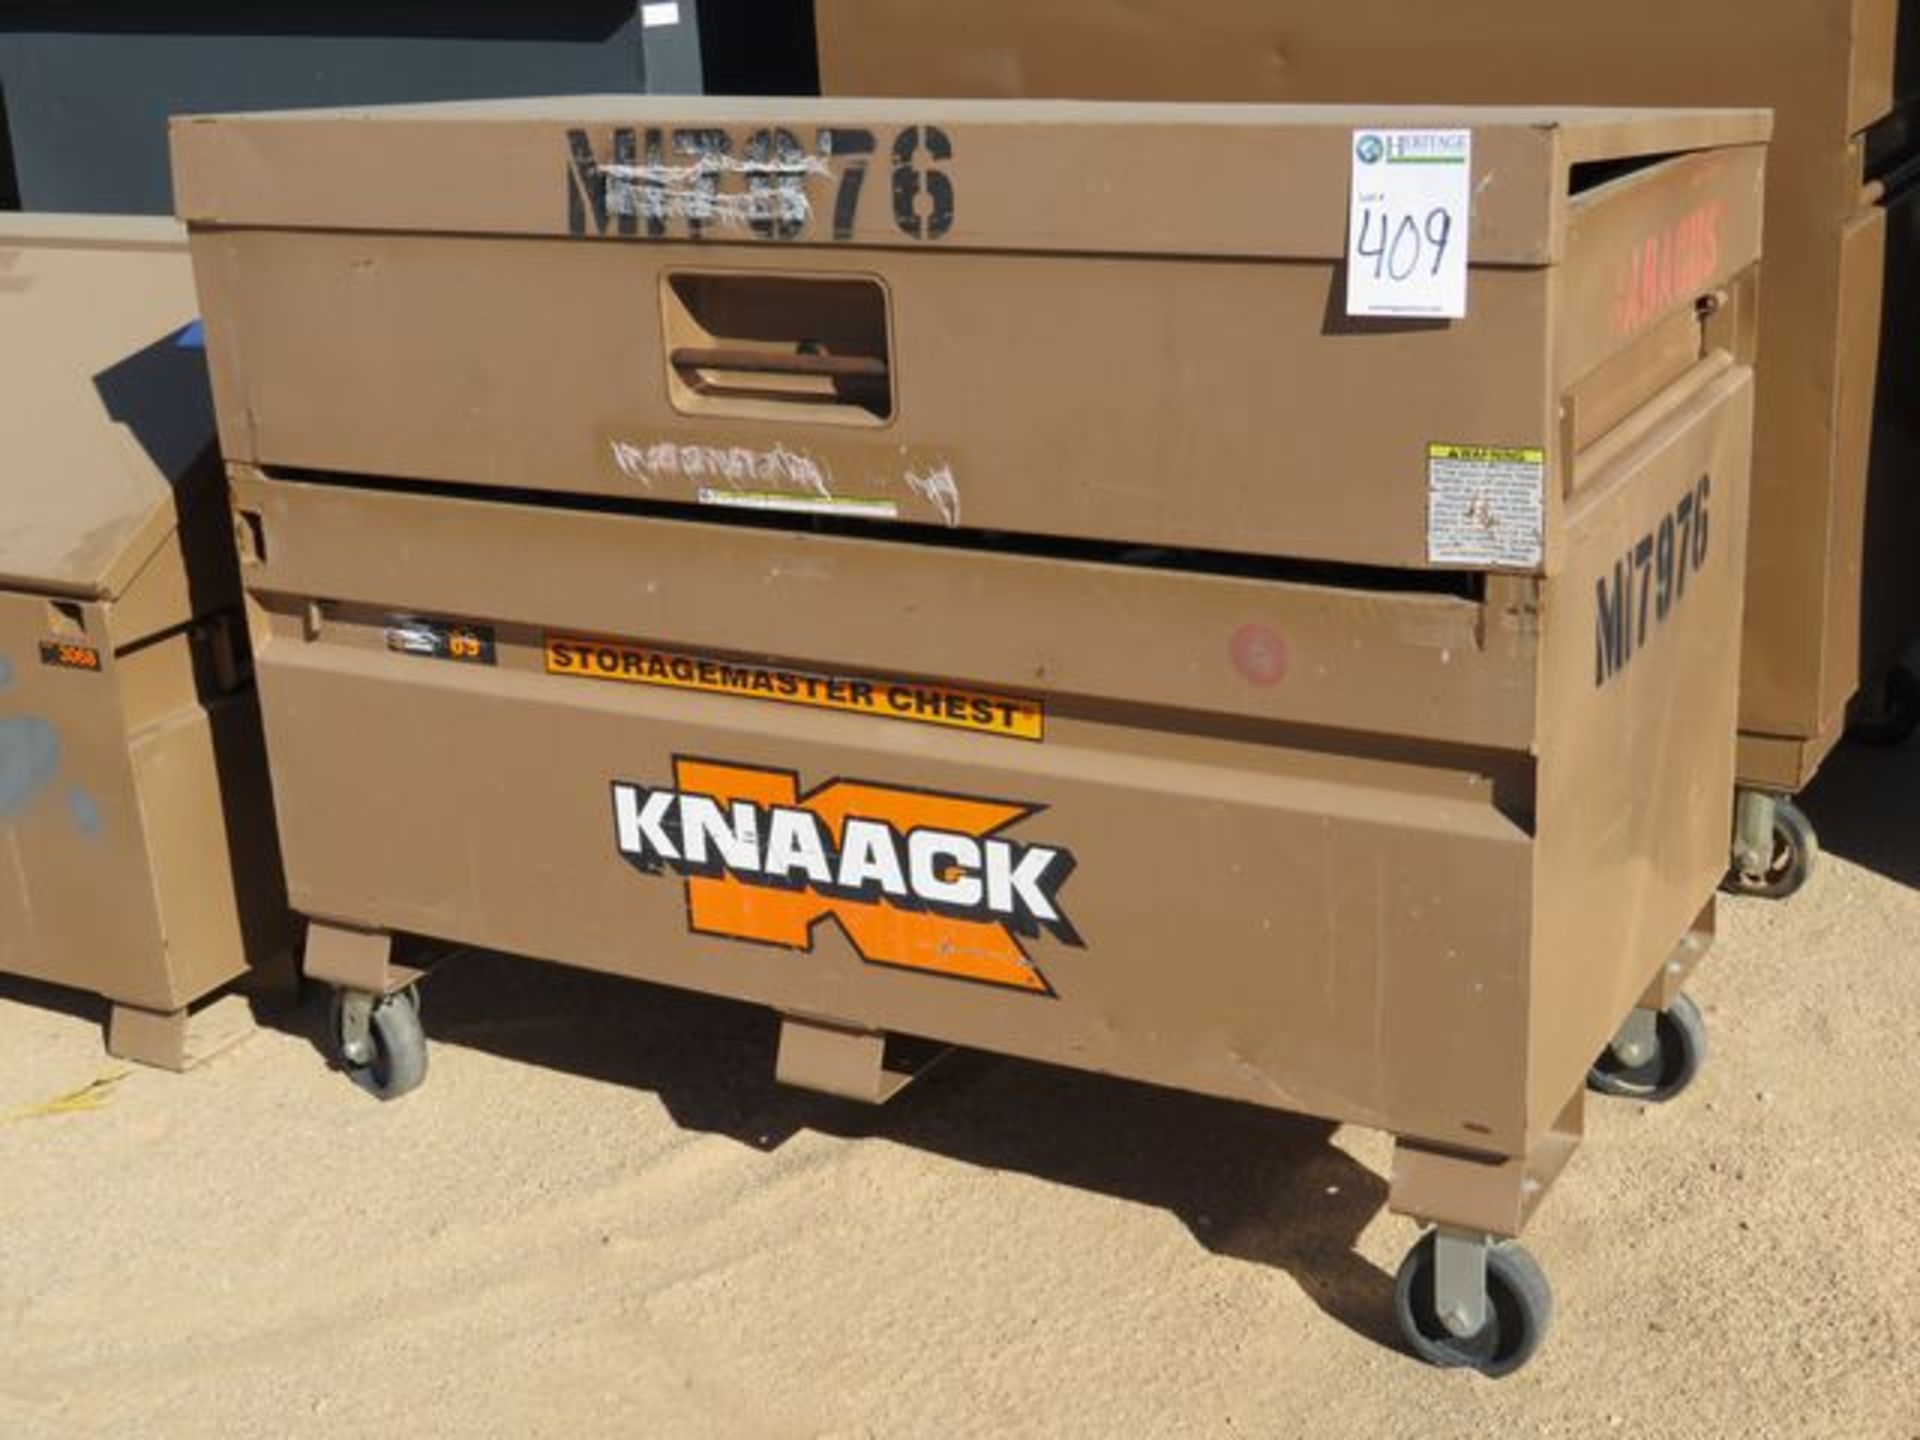 Knaack 69 Storage Tool Chest. 61" x 31" x 45"H, on Castors, w/ Contents of Safety Harnesses. Asset